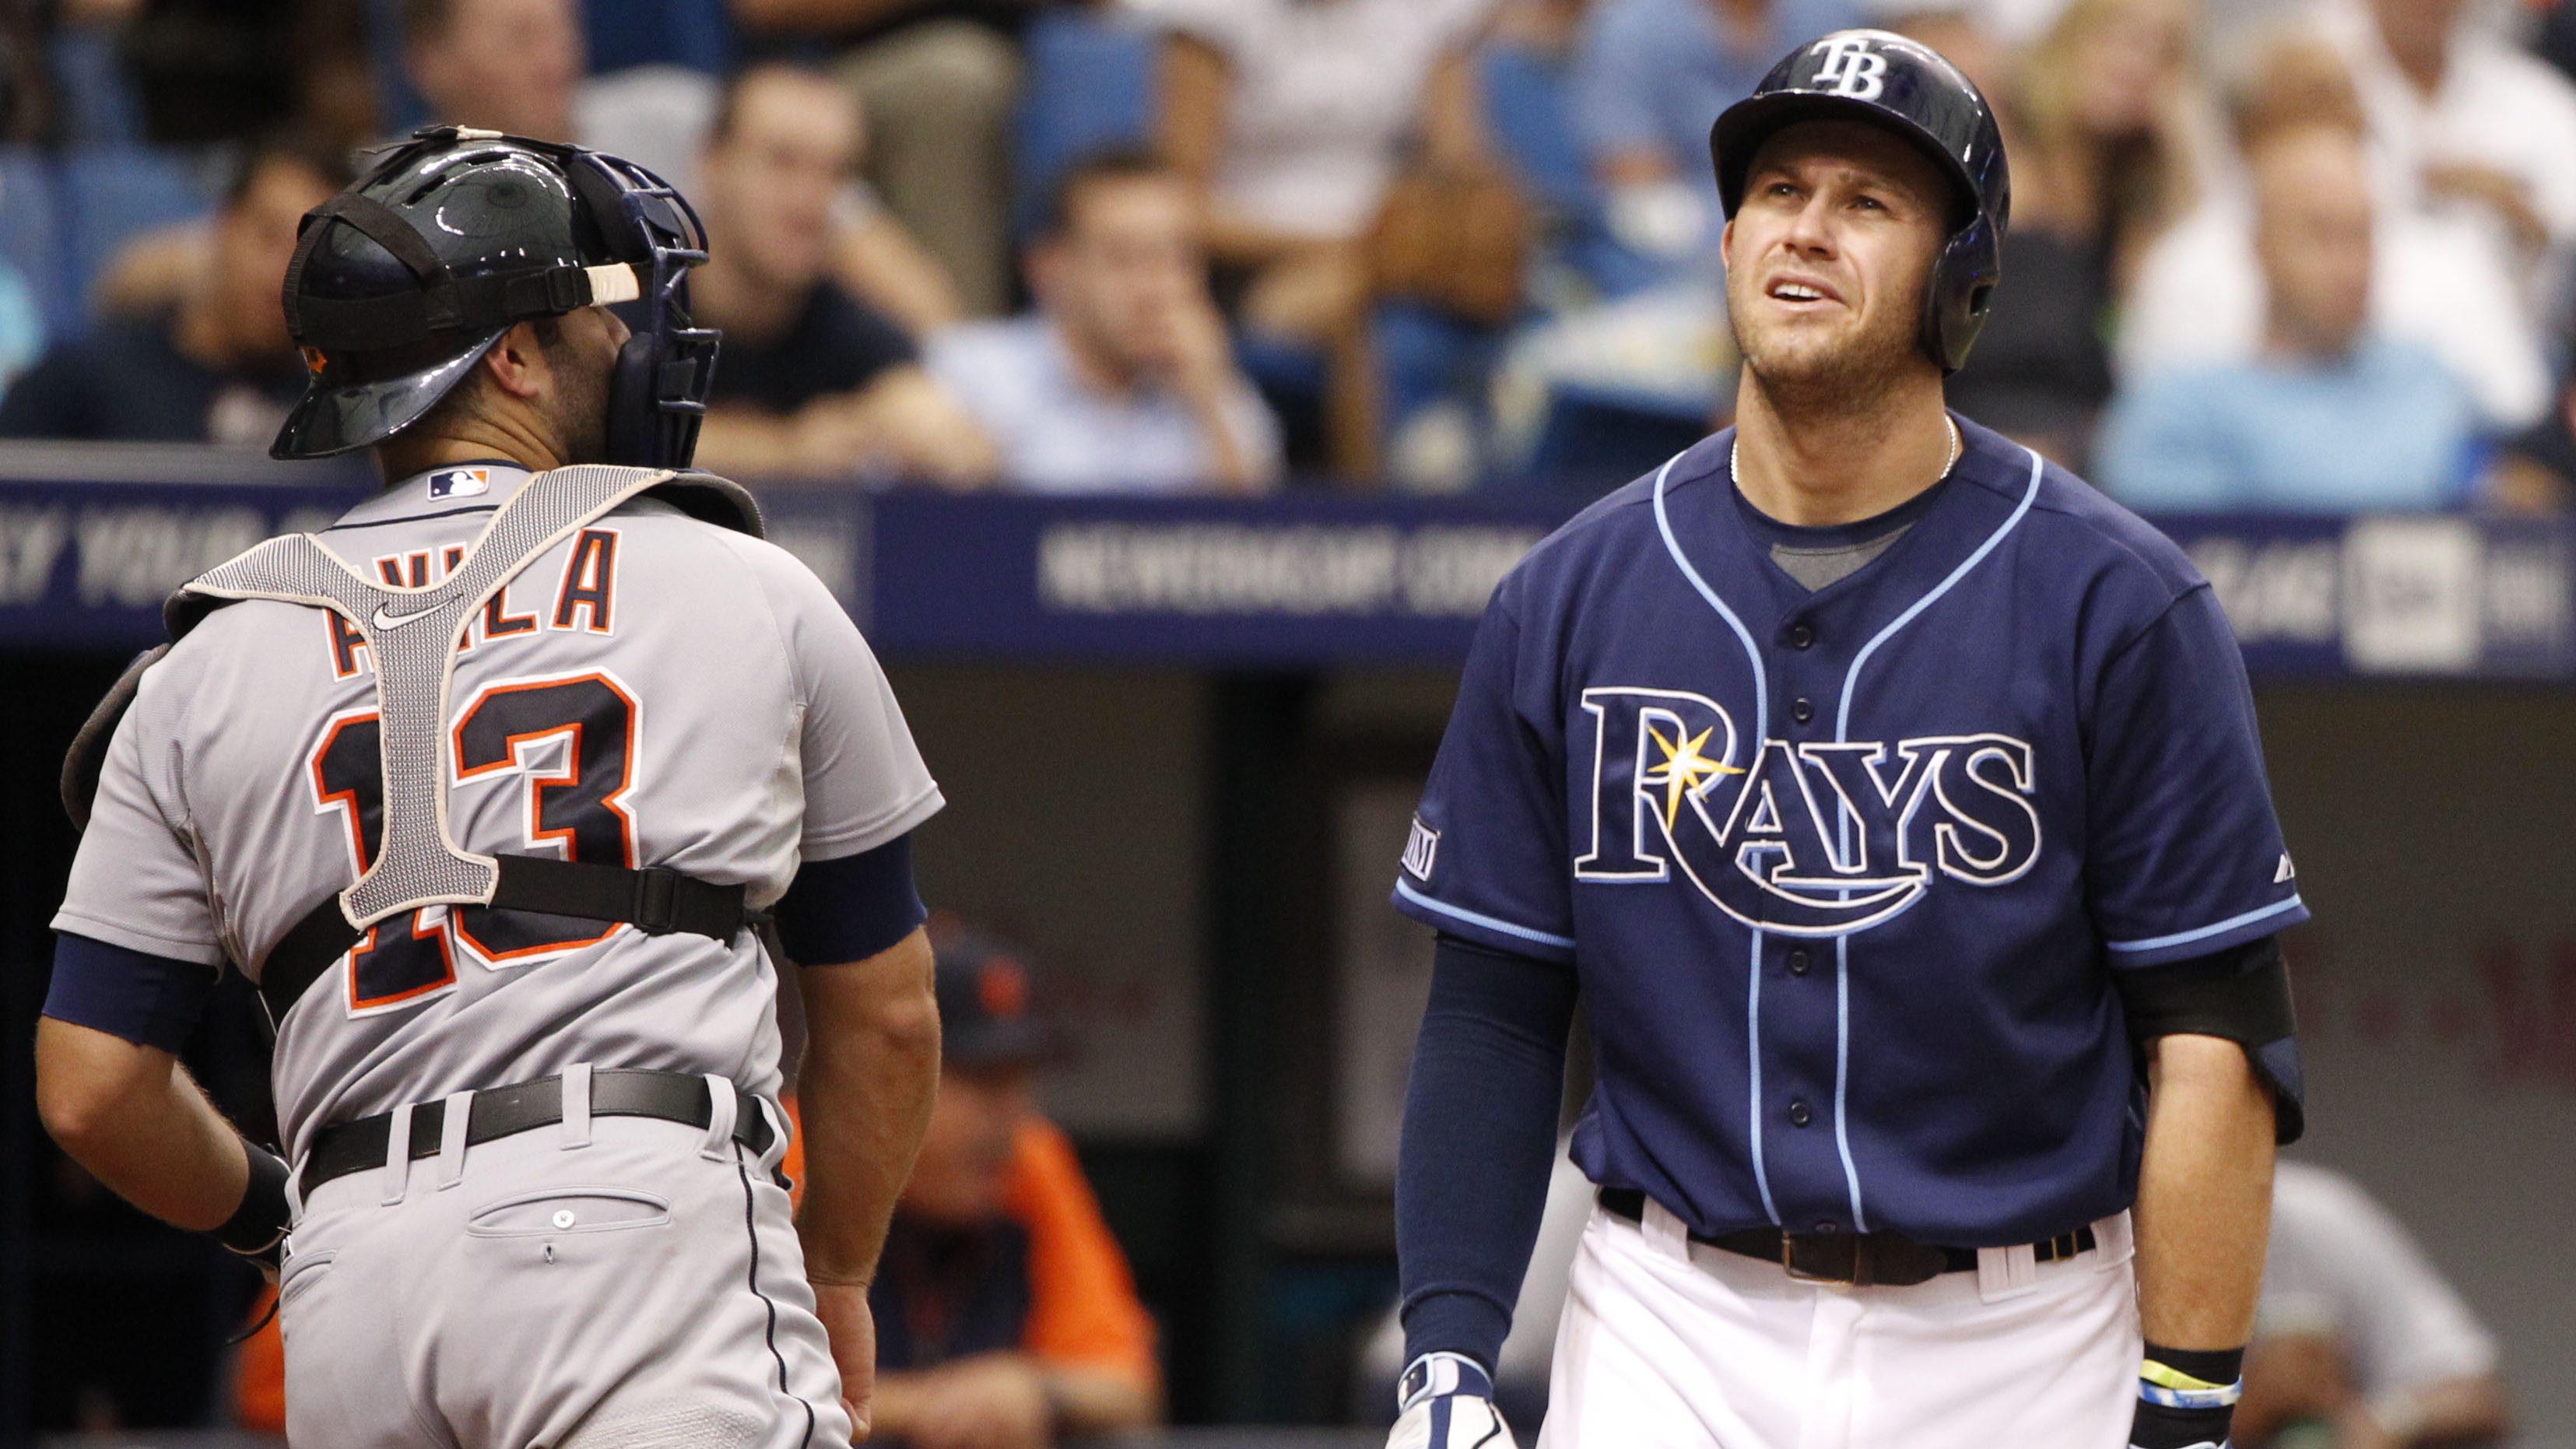 Evan Longoria ranked as the 51st best player in MLB